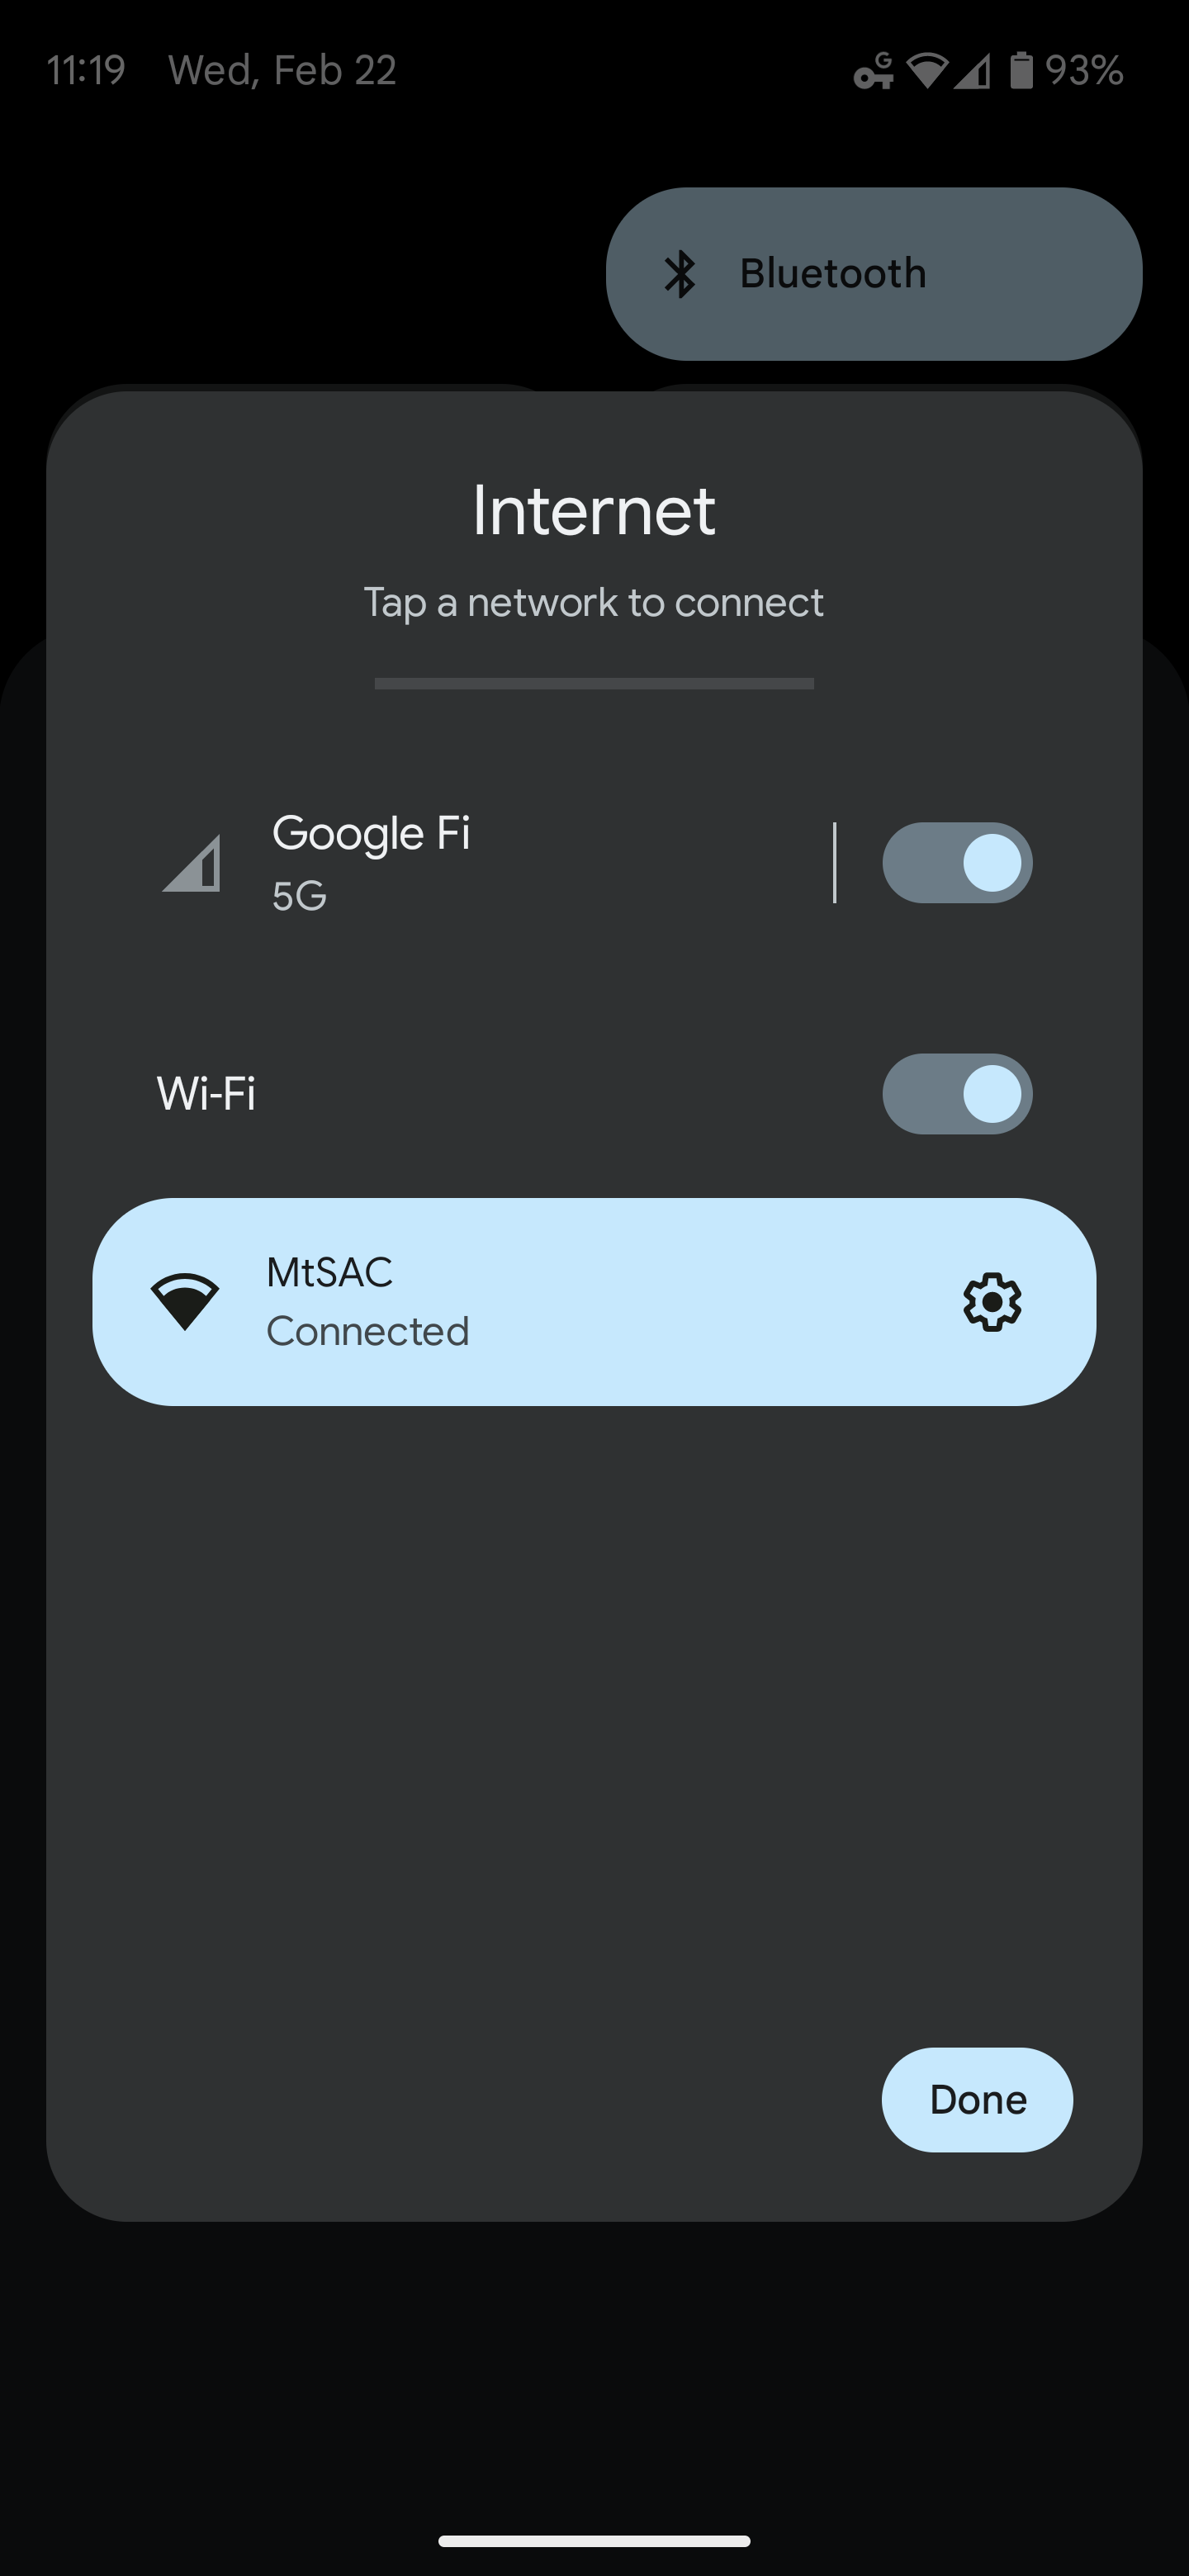 Android screen with the MtSAC network shown as connected